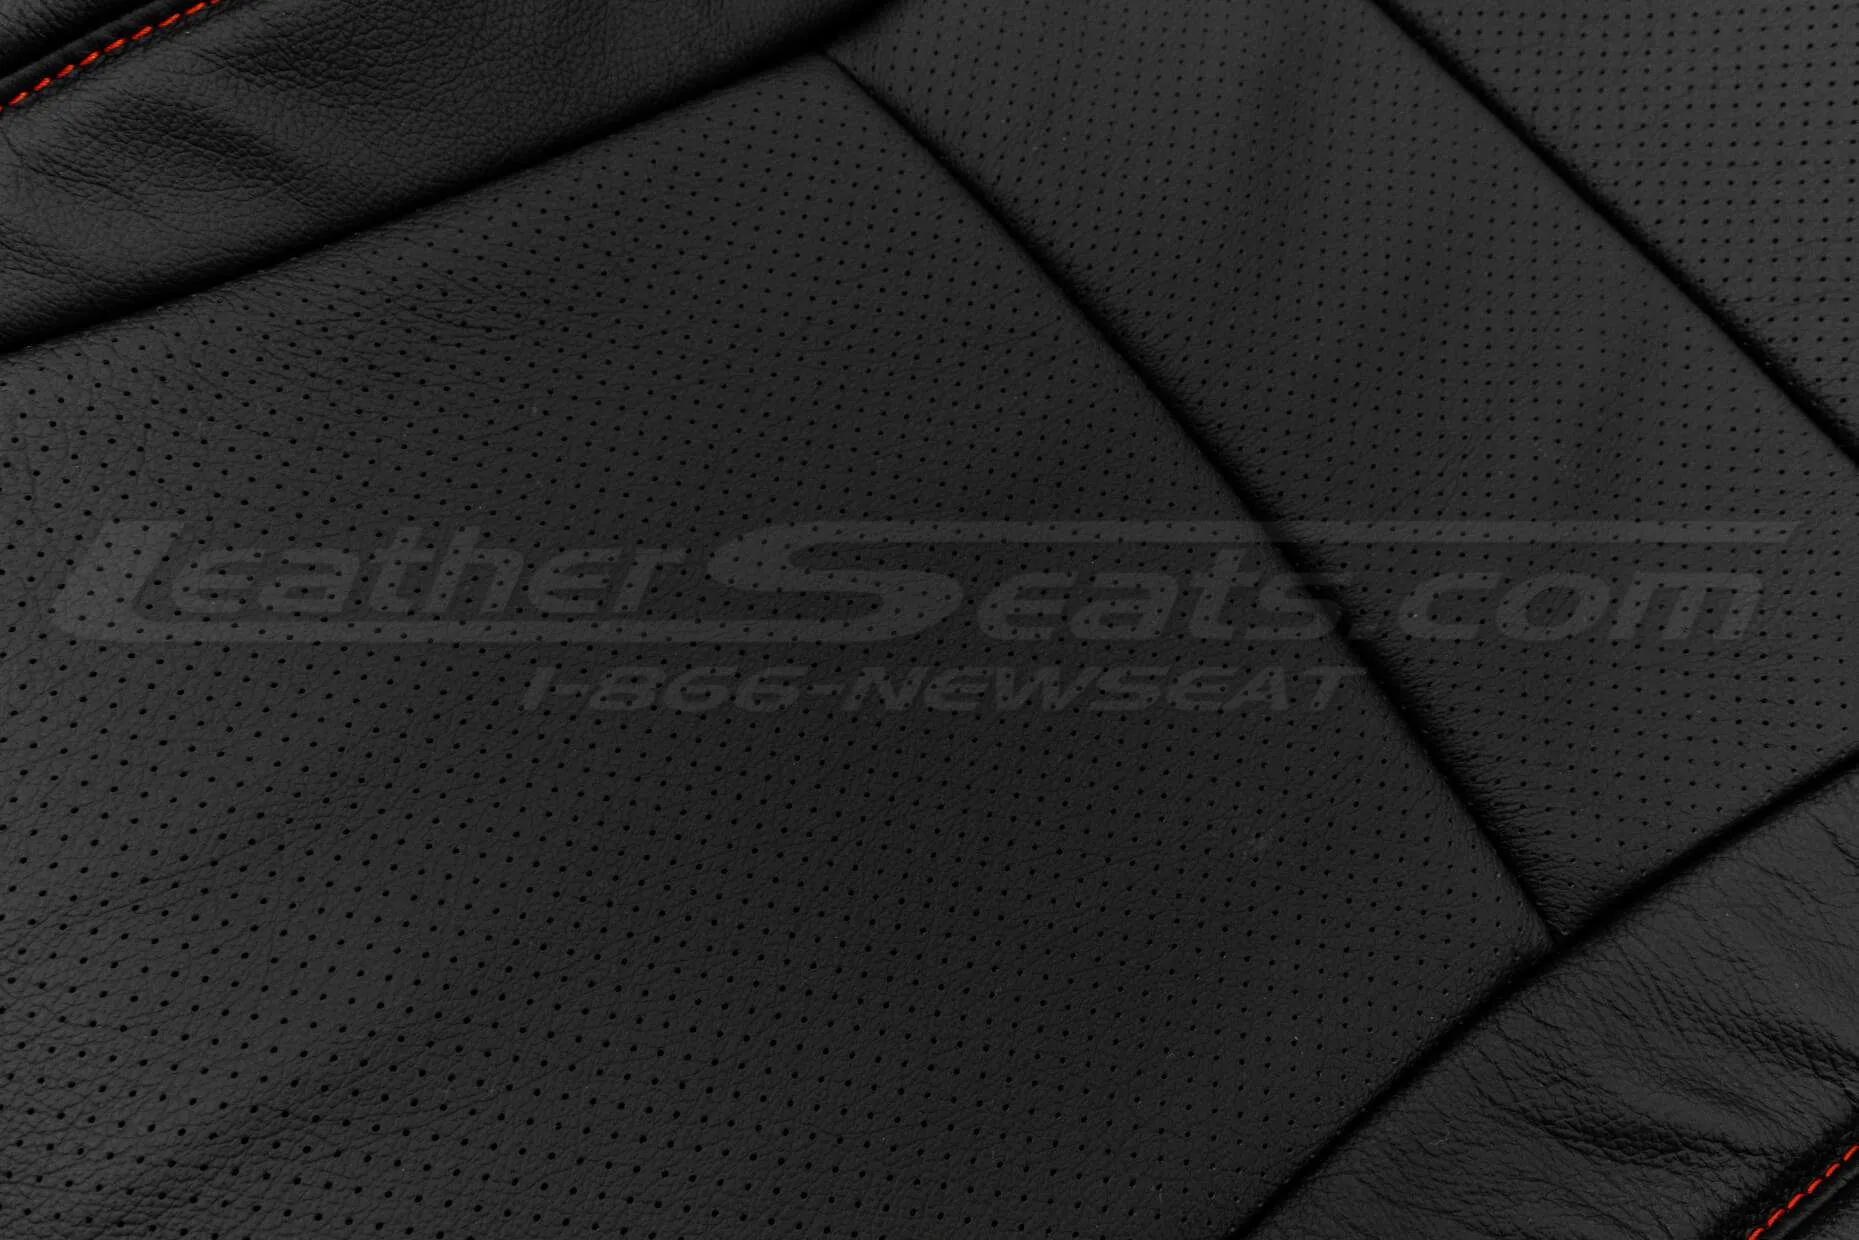 Perforated body on backrest